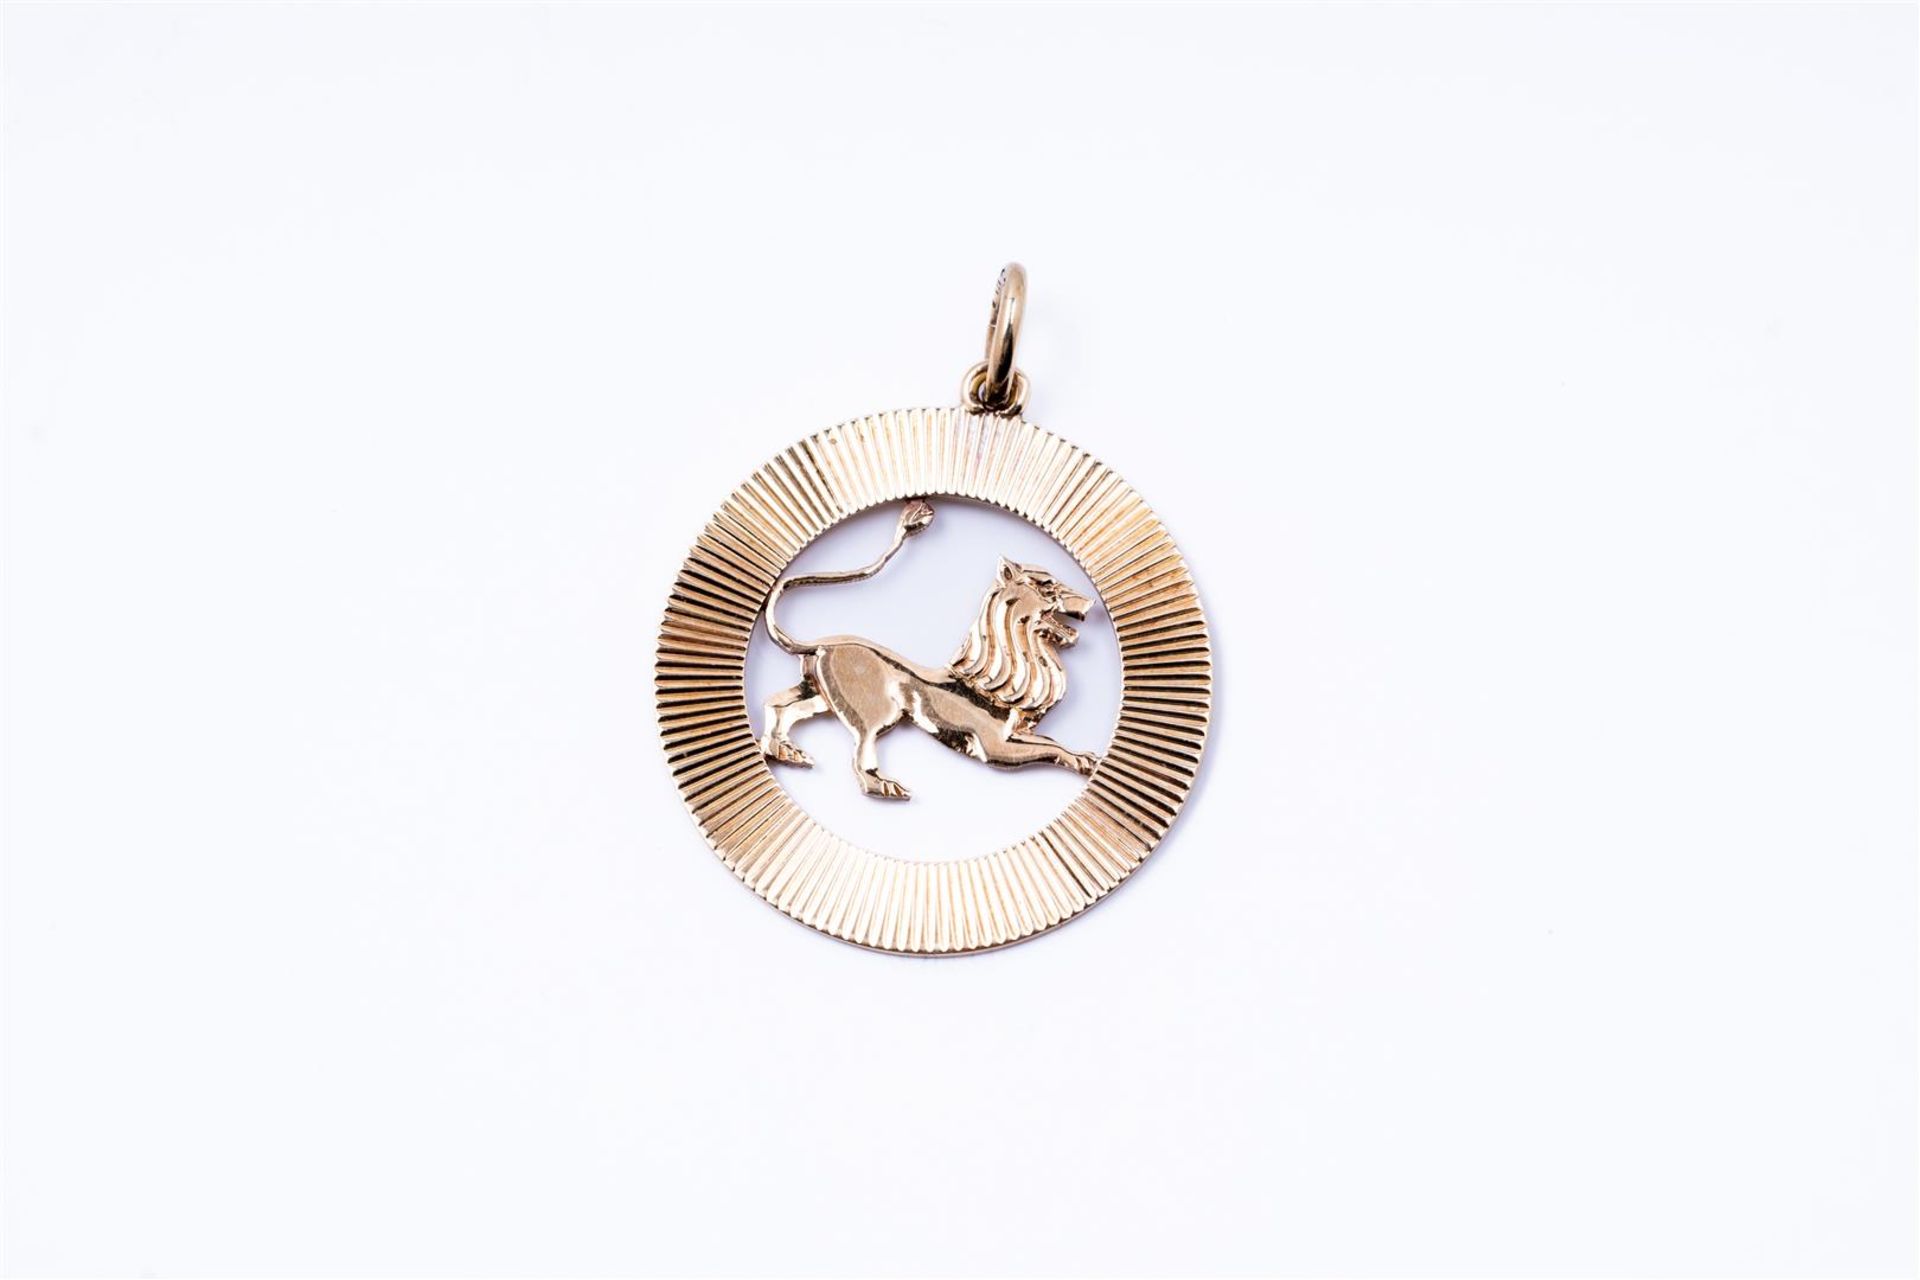 18kt Yellow gold pendant with lion and ribbed edge.
Dimensions: 35.8mm x 27.9mm.
Weight: 5.49 grams. - Image 2 of 2